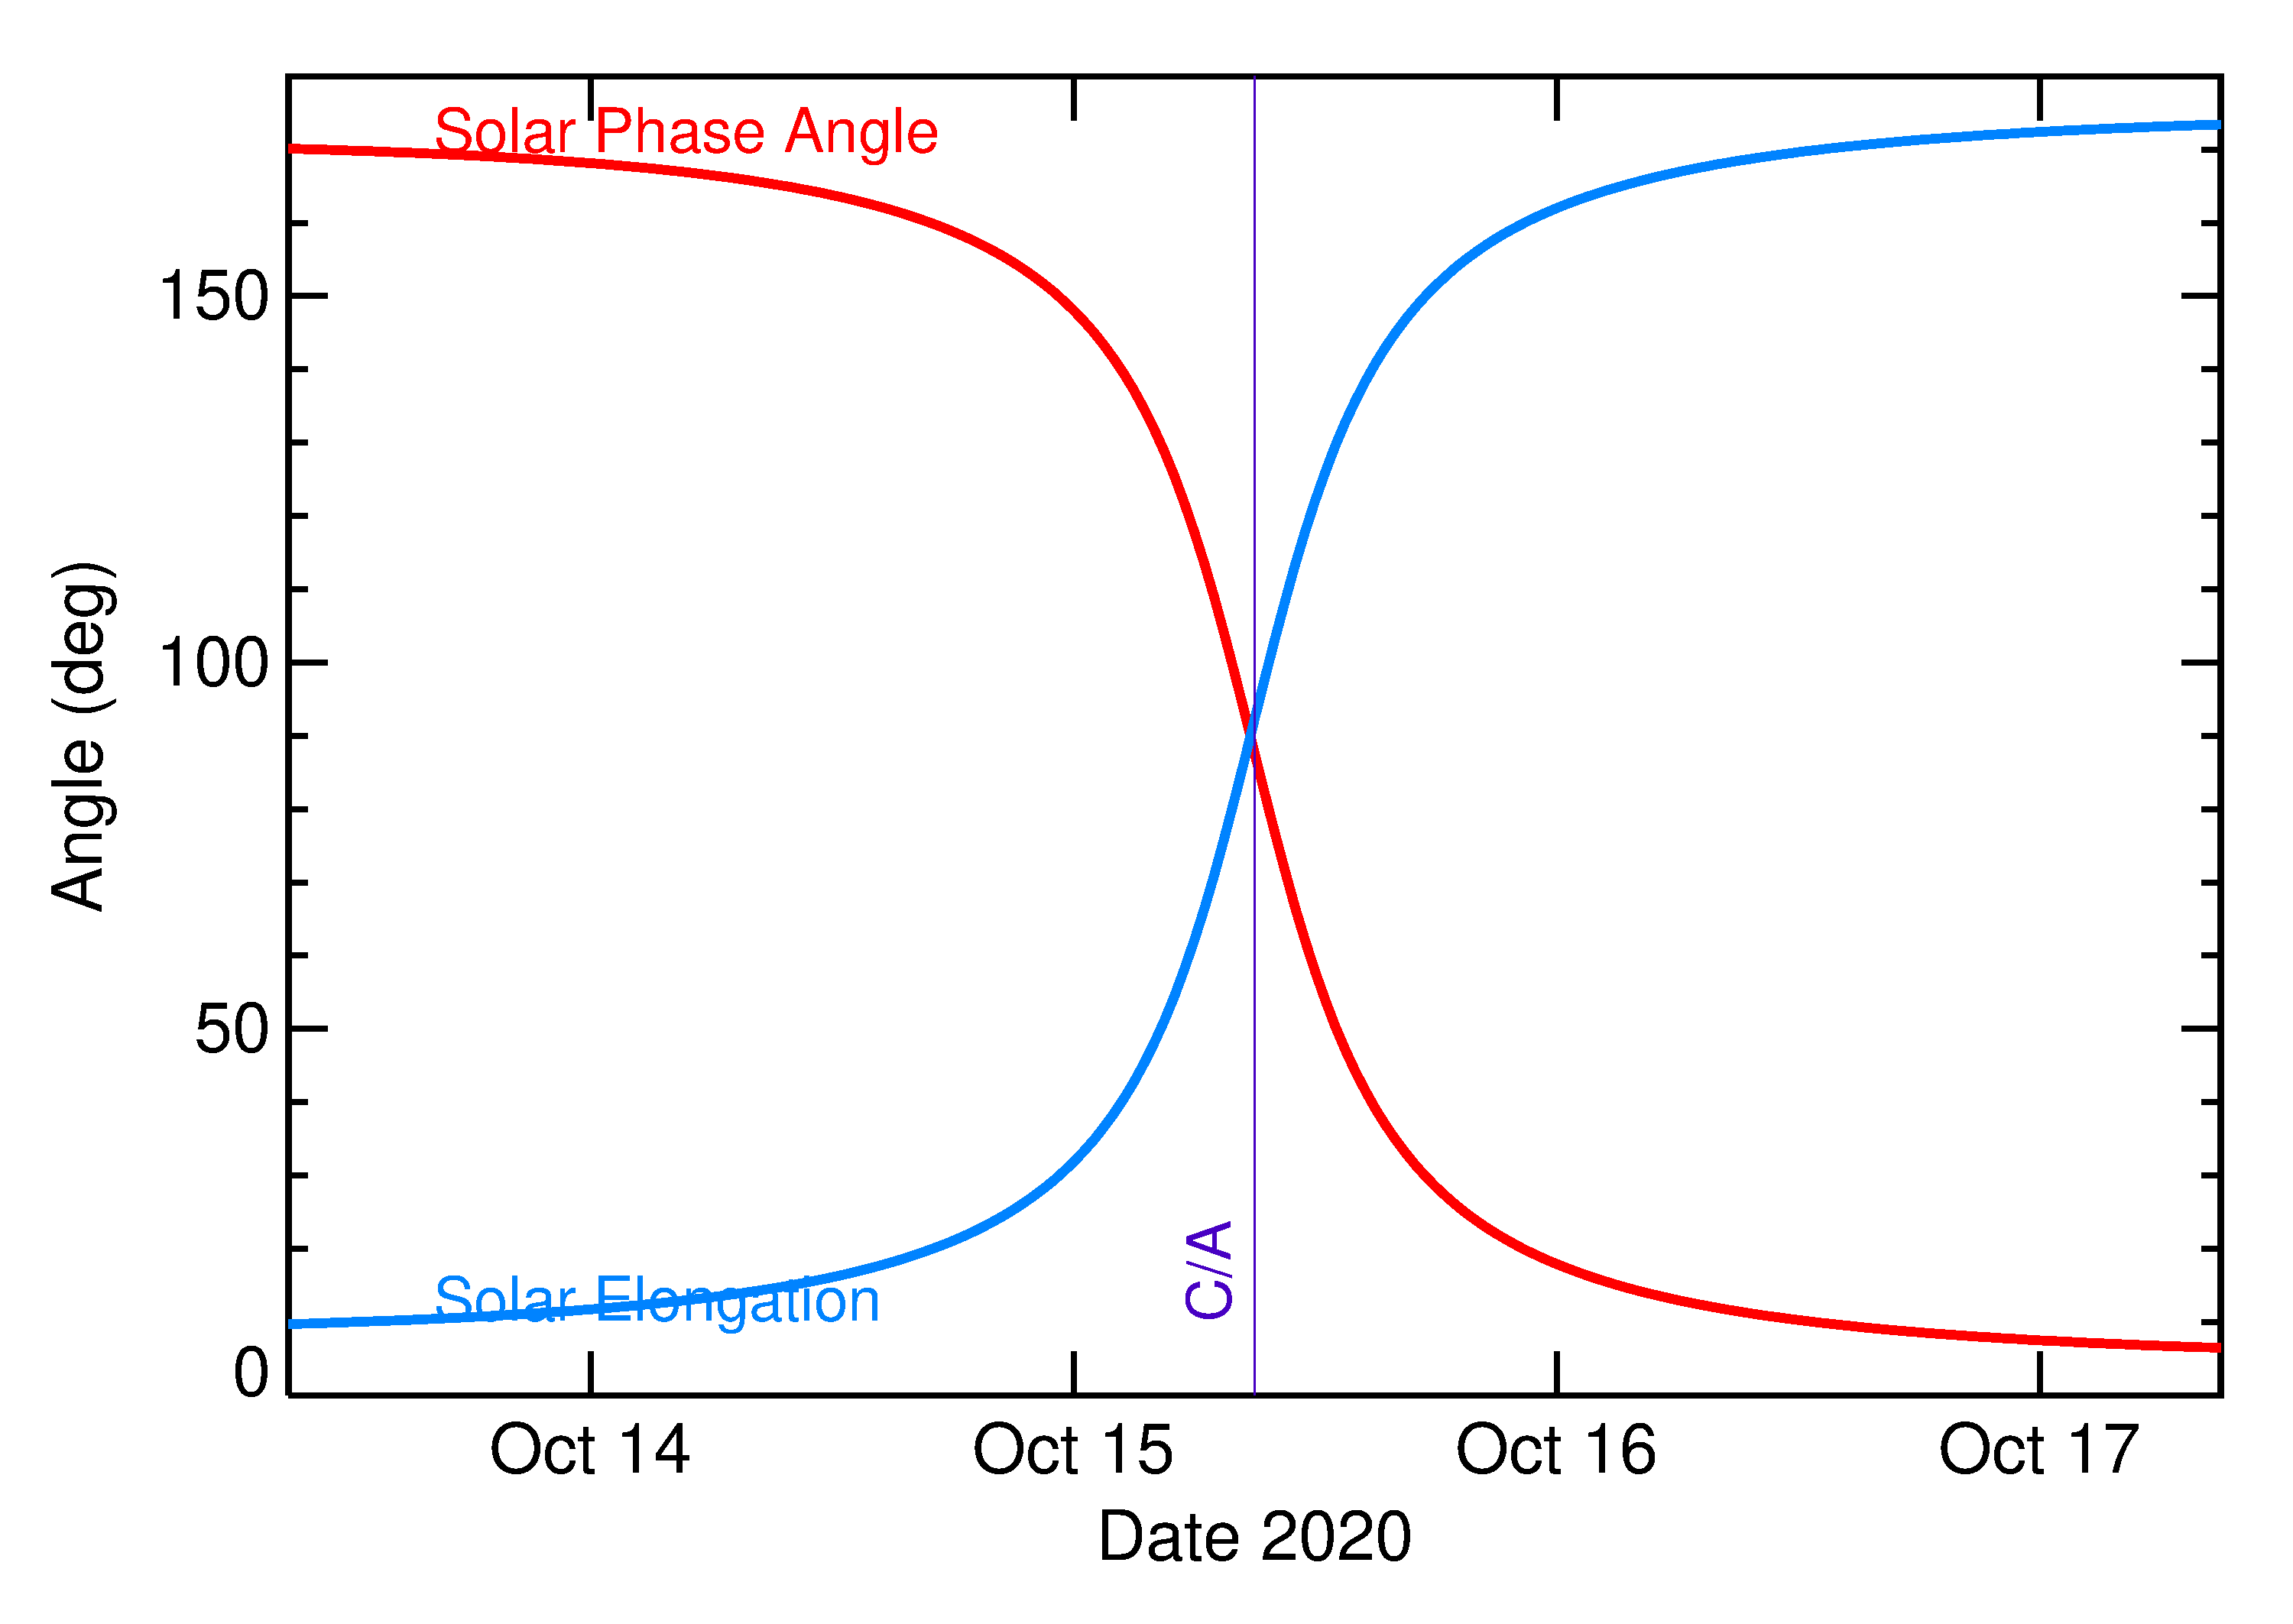 Solar Elongation and Solar Phase Angle of 2020 UE in the days around closest approach